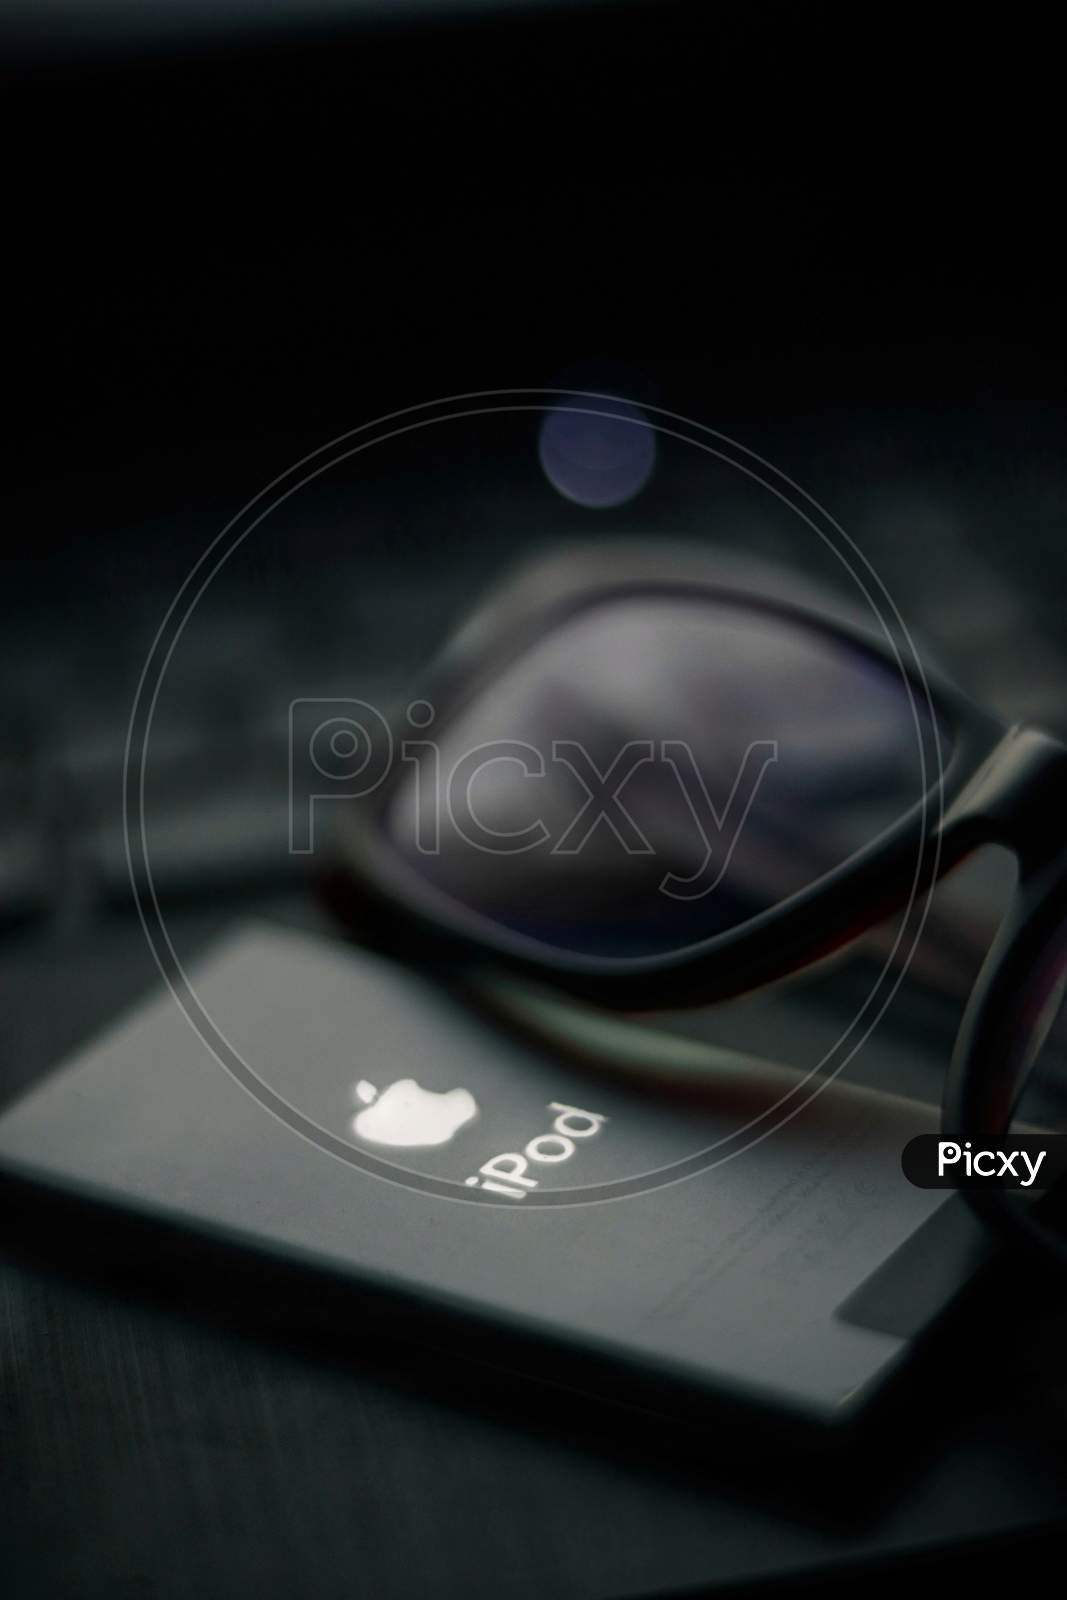 Apple Ipod with Ray Ban glasses